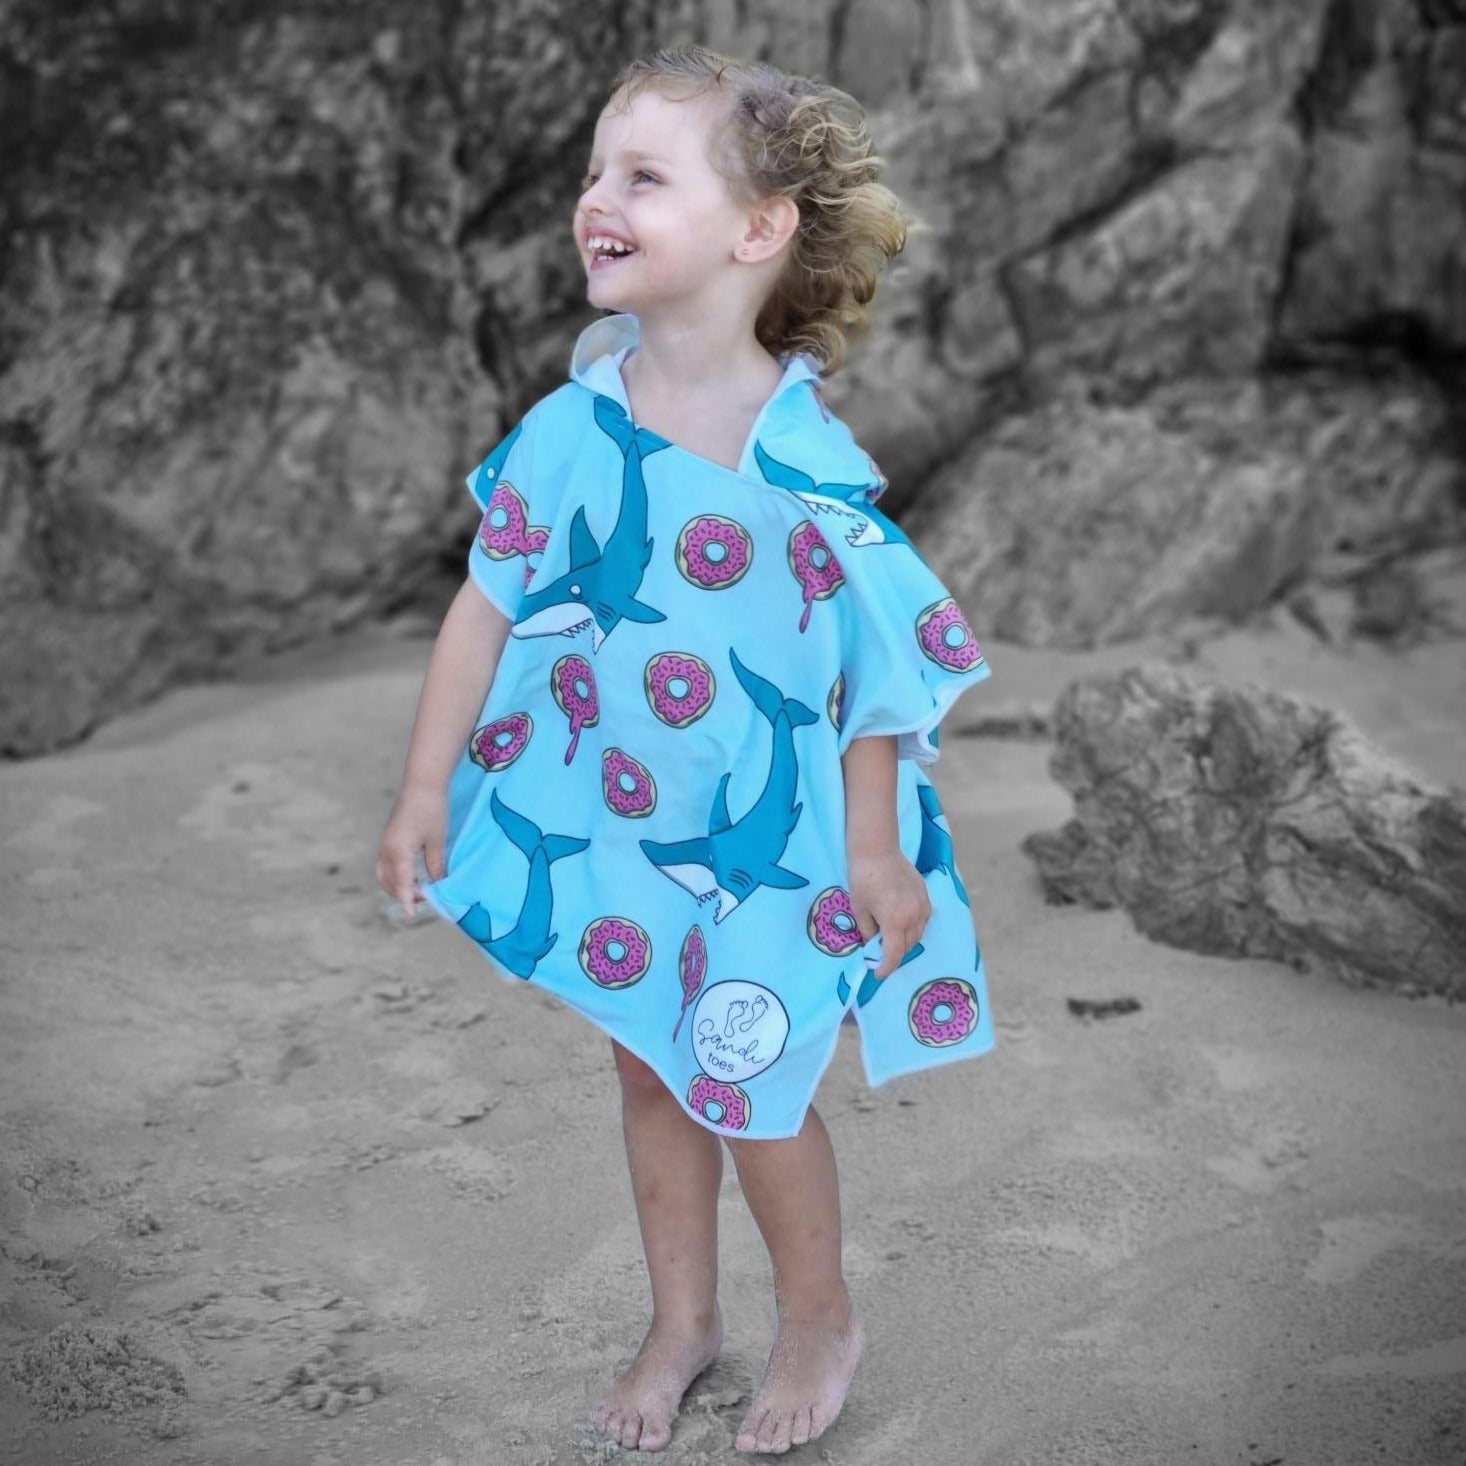 Sand Free Beach Towel shows 3 year old girl at Currumbin Beach Queensland with sharks and donuts on her beach towel big smile